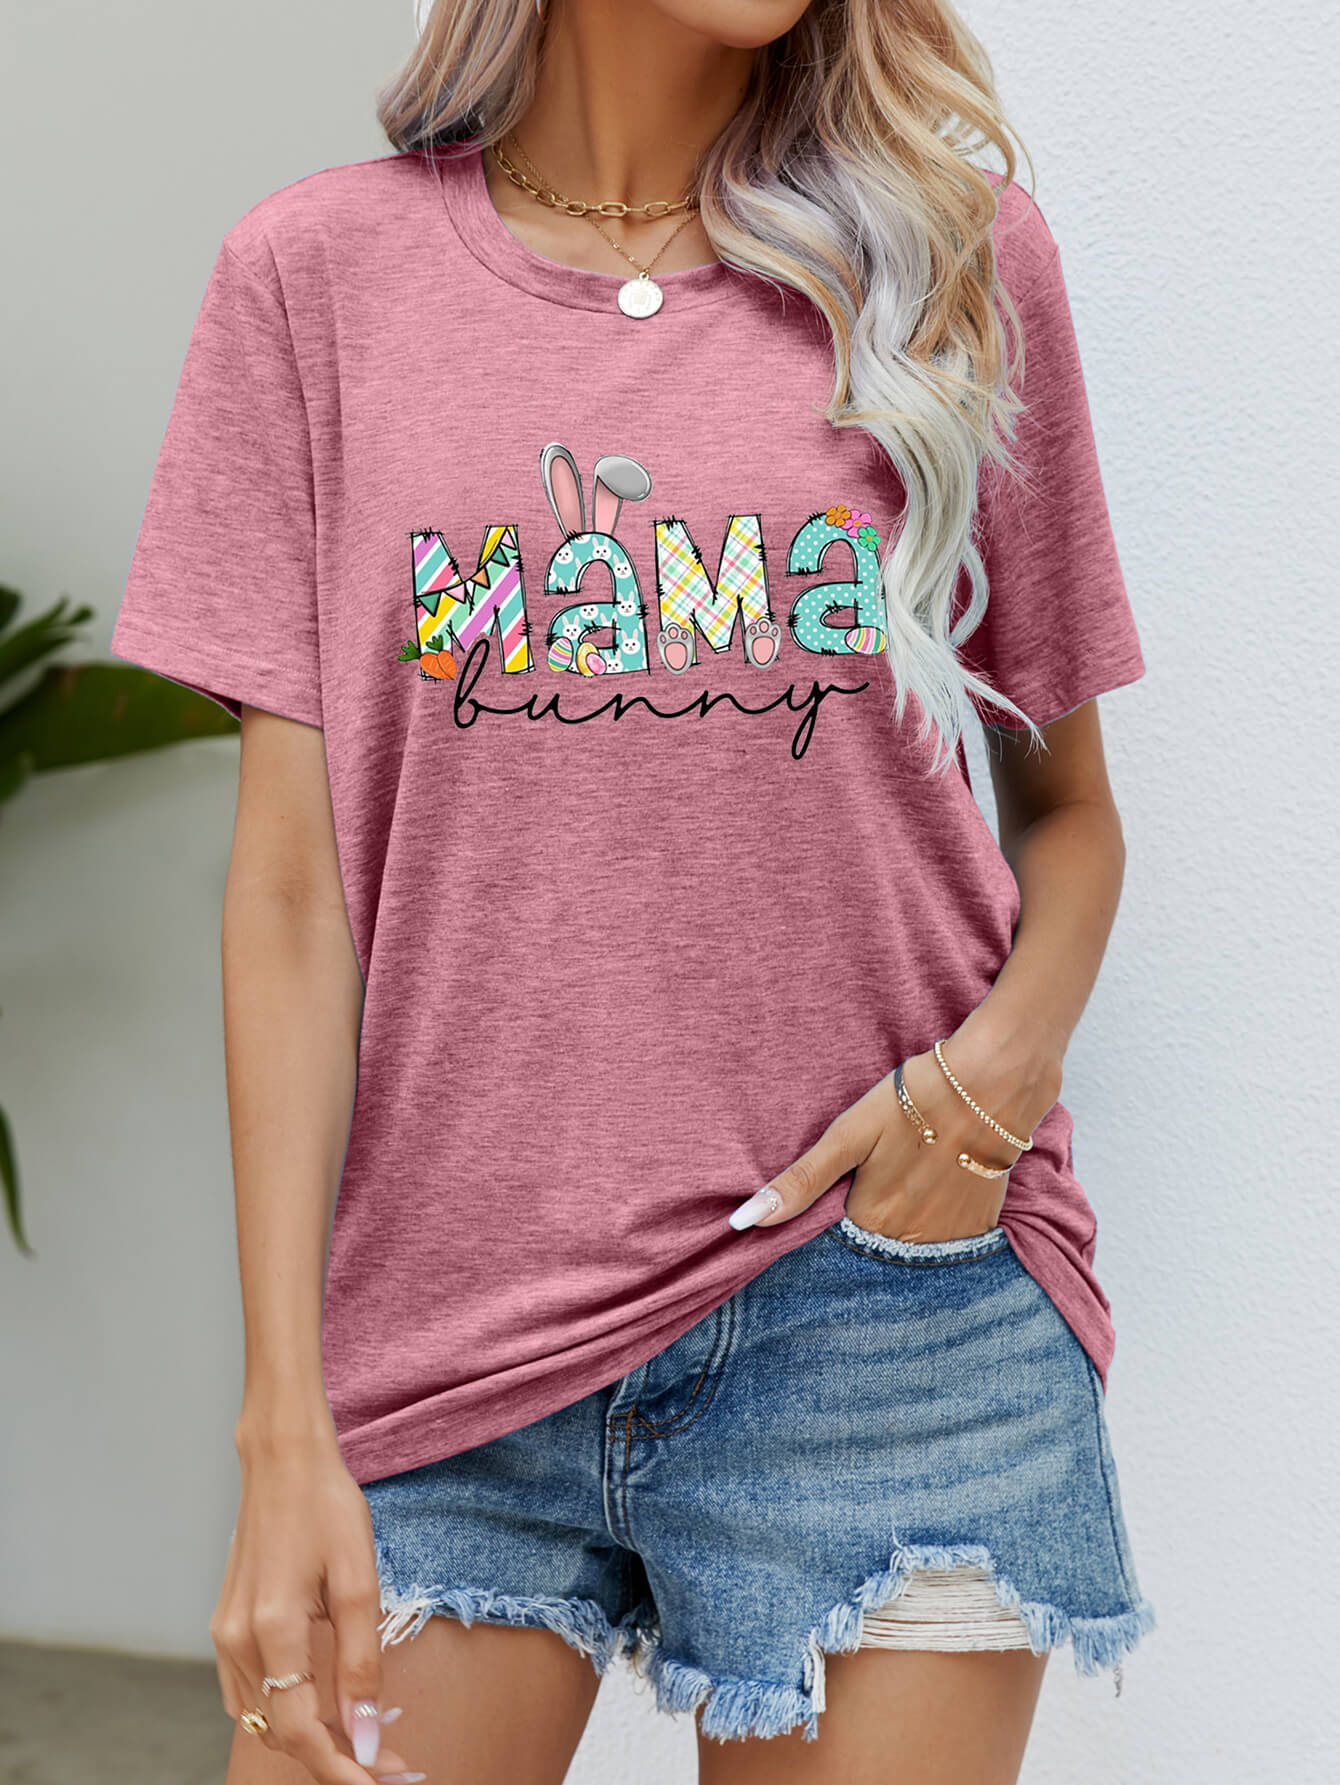 MAMA BUNNY Easter Graphic Tee (6 Colors)  Krazy Heart Designs Boutique Rouge Pink S 